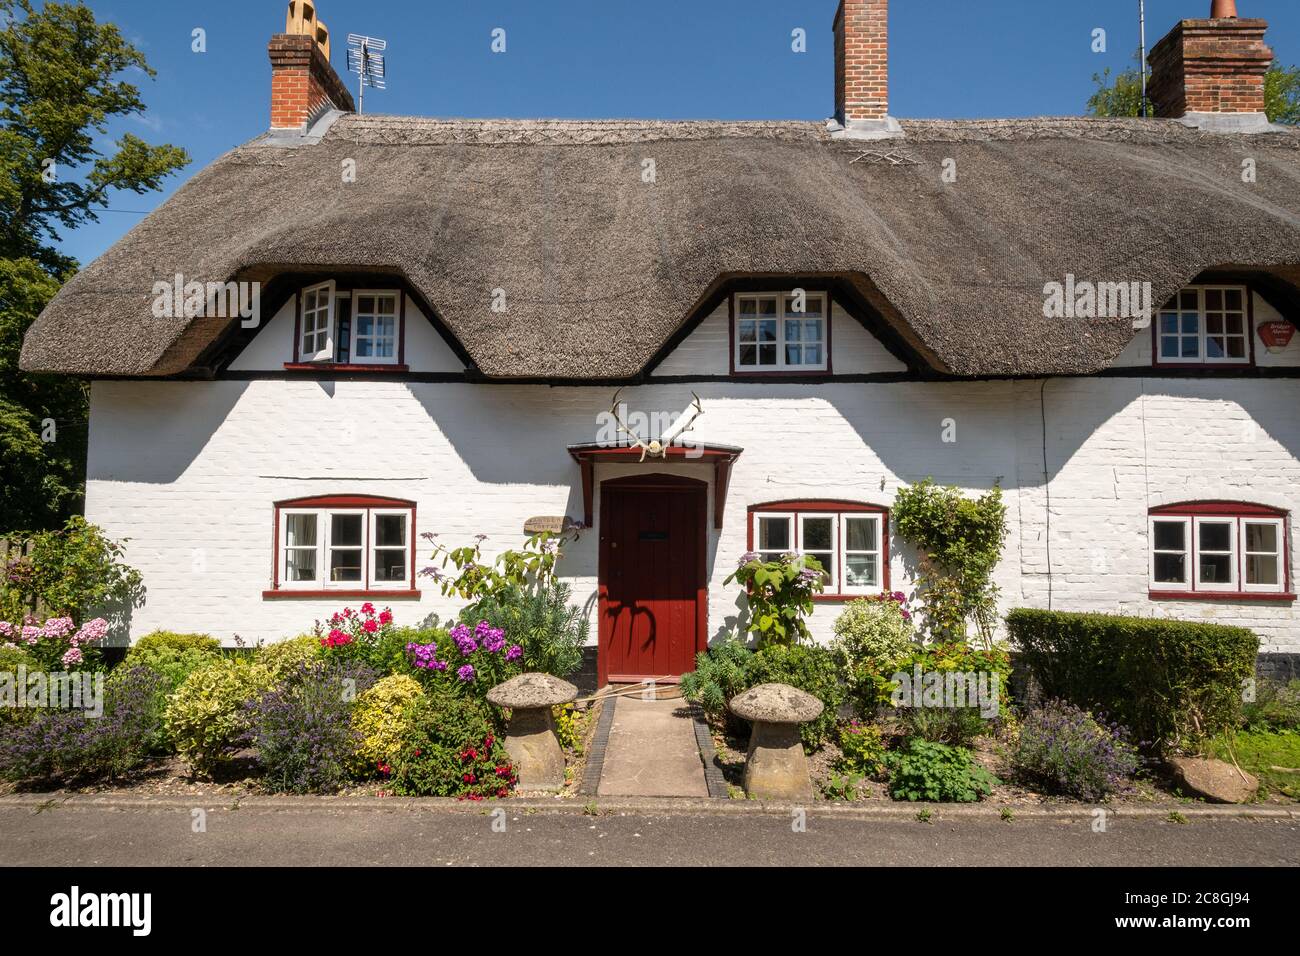 Thatched cottage called Antlers Cottage with deer antlers over the door, Wherwell, Hampshire, UK Stock Photo